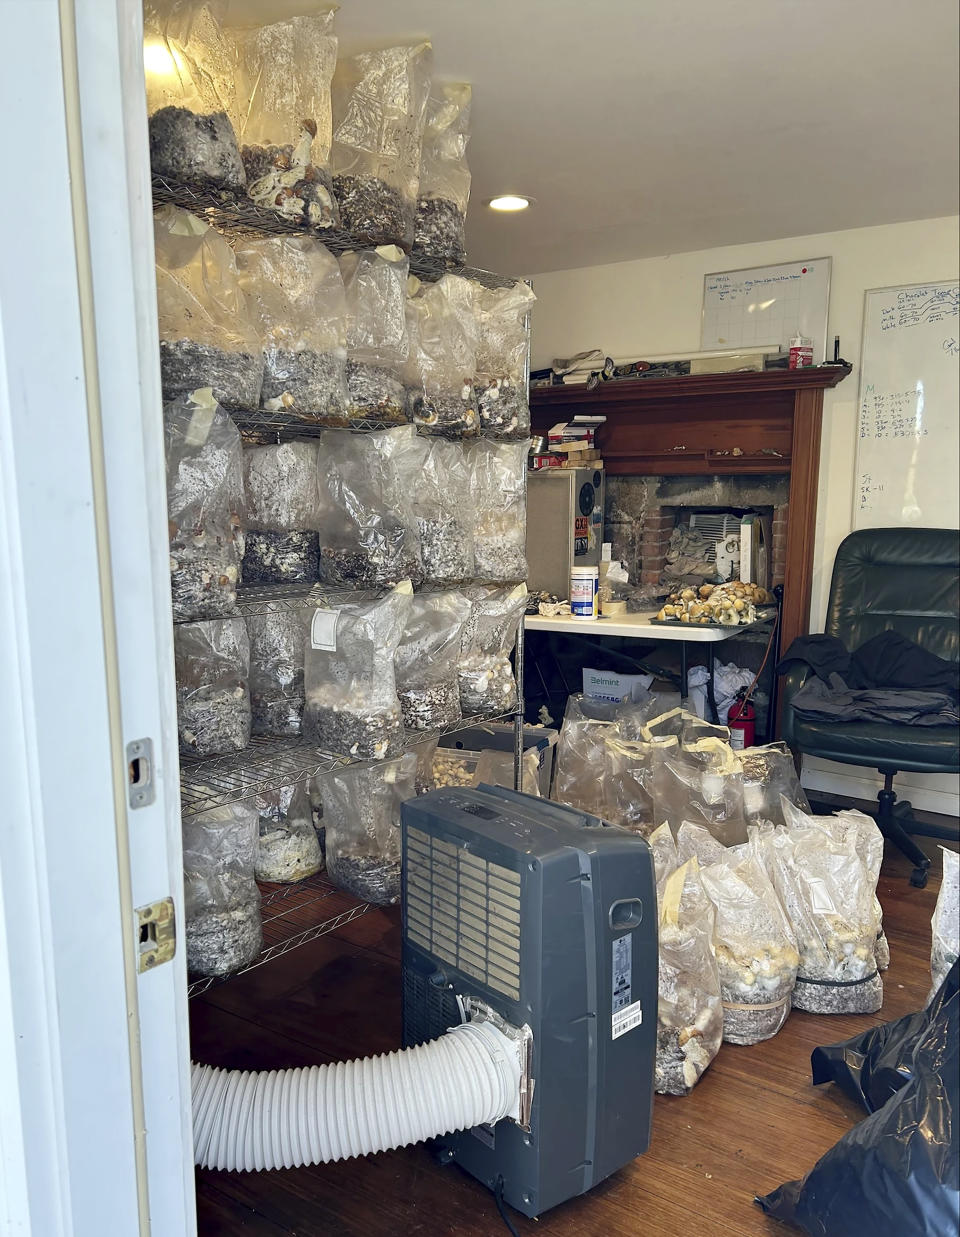 This photo, released by the Connecticut State Police, shows bags of psychedelic mushrooms in a home in Burlington, CT, Thursday, Nov. 2, 2023. Federal, state and local authorities allege they found a clandestine mushroom-growing factory, containing psilocybin mushrooms in various stages of growth, with an estimated total street value of $8,500,000. (Connecticut State Police via AP)